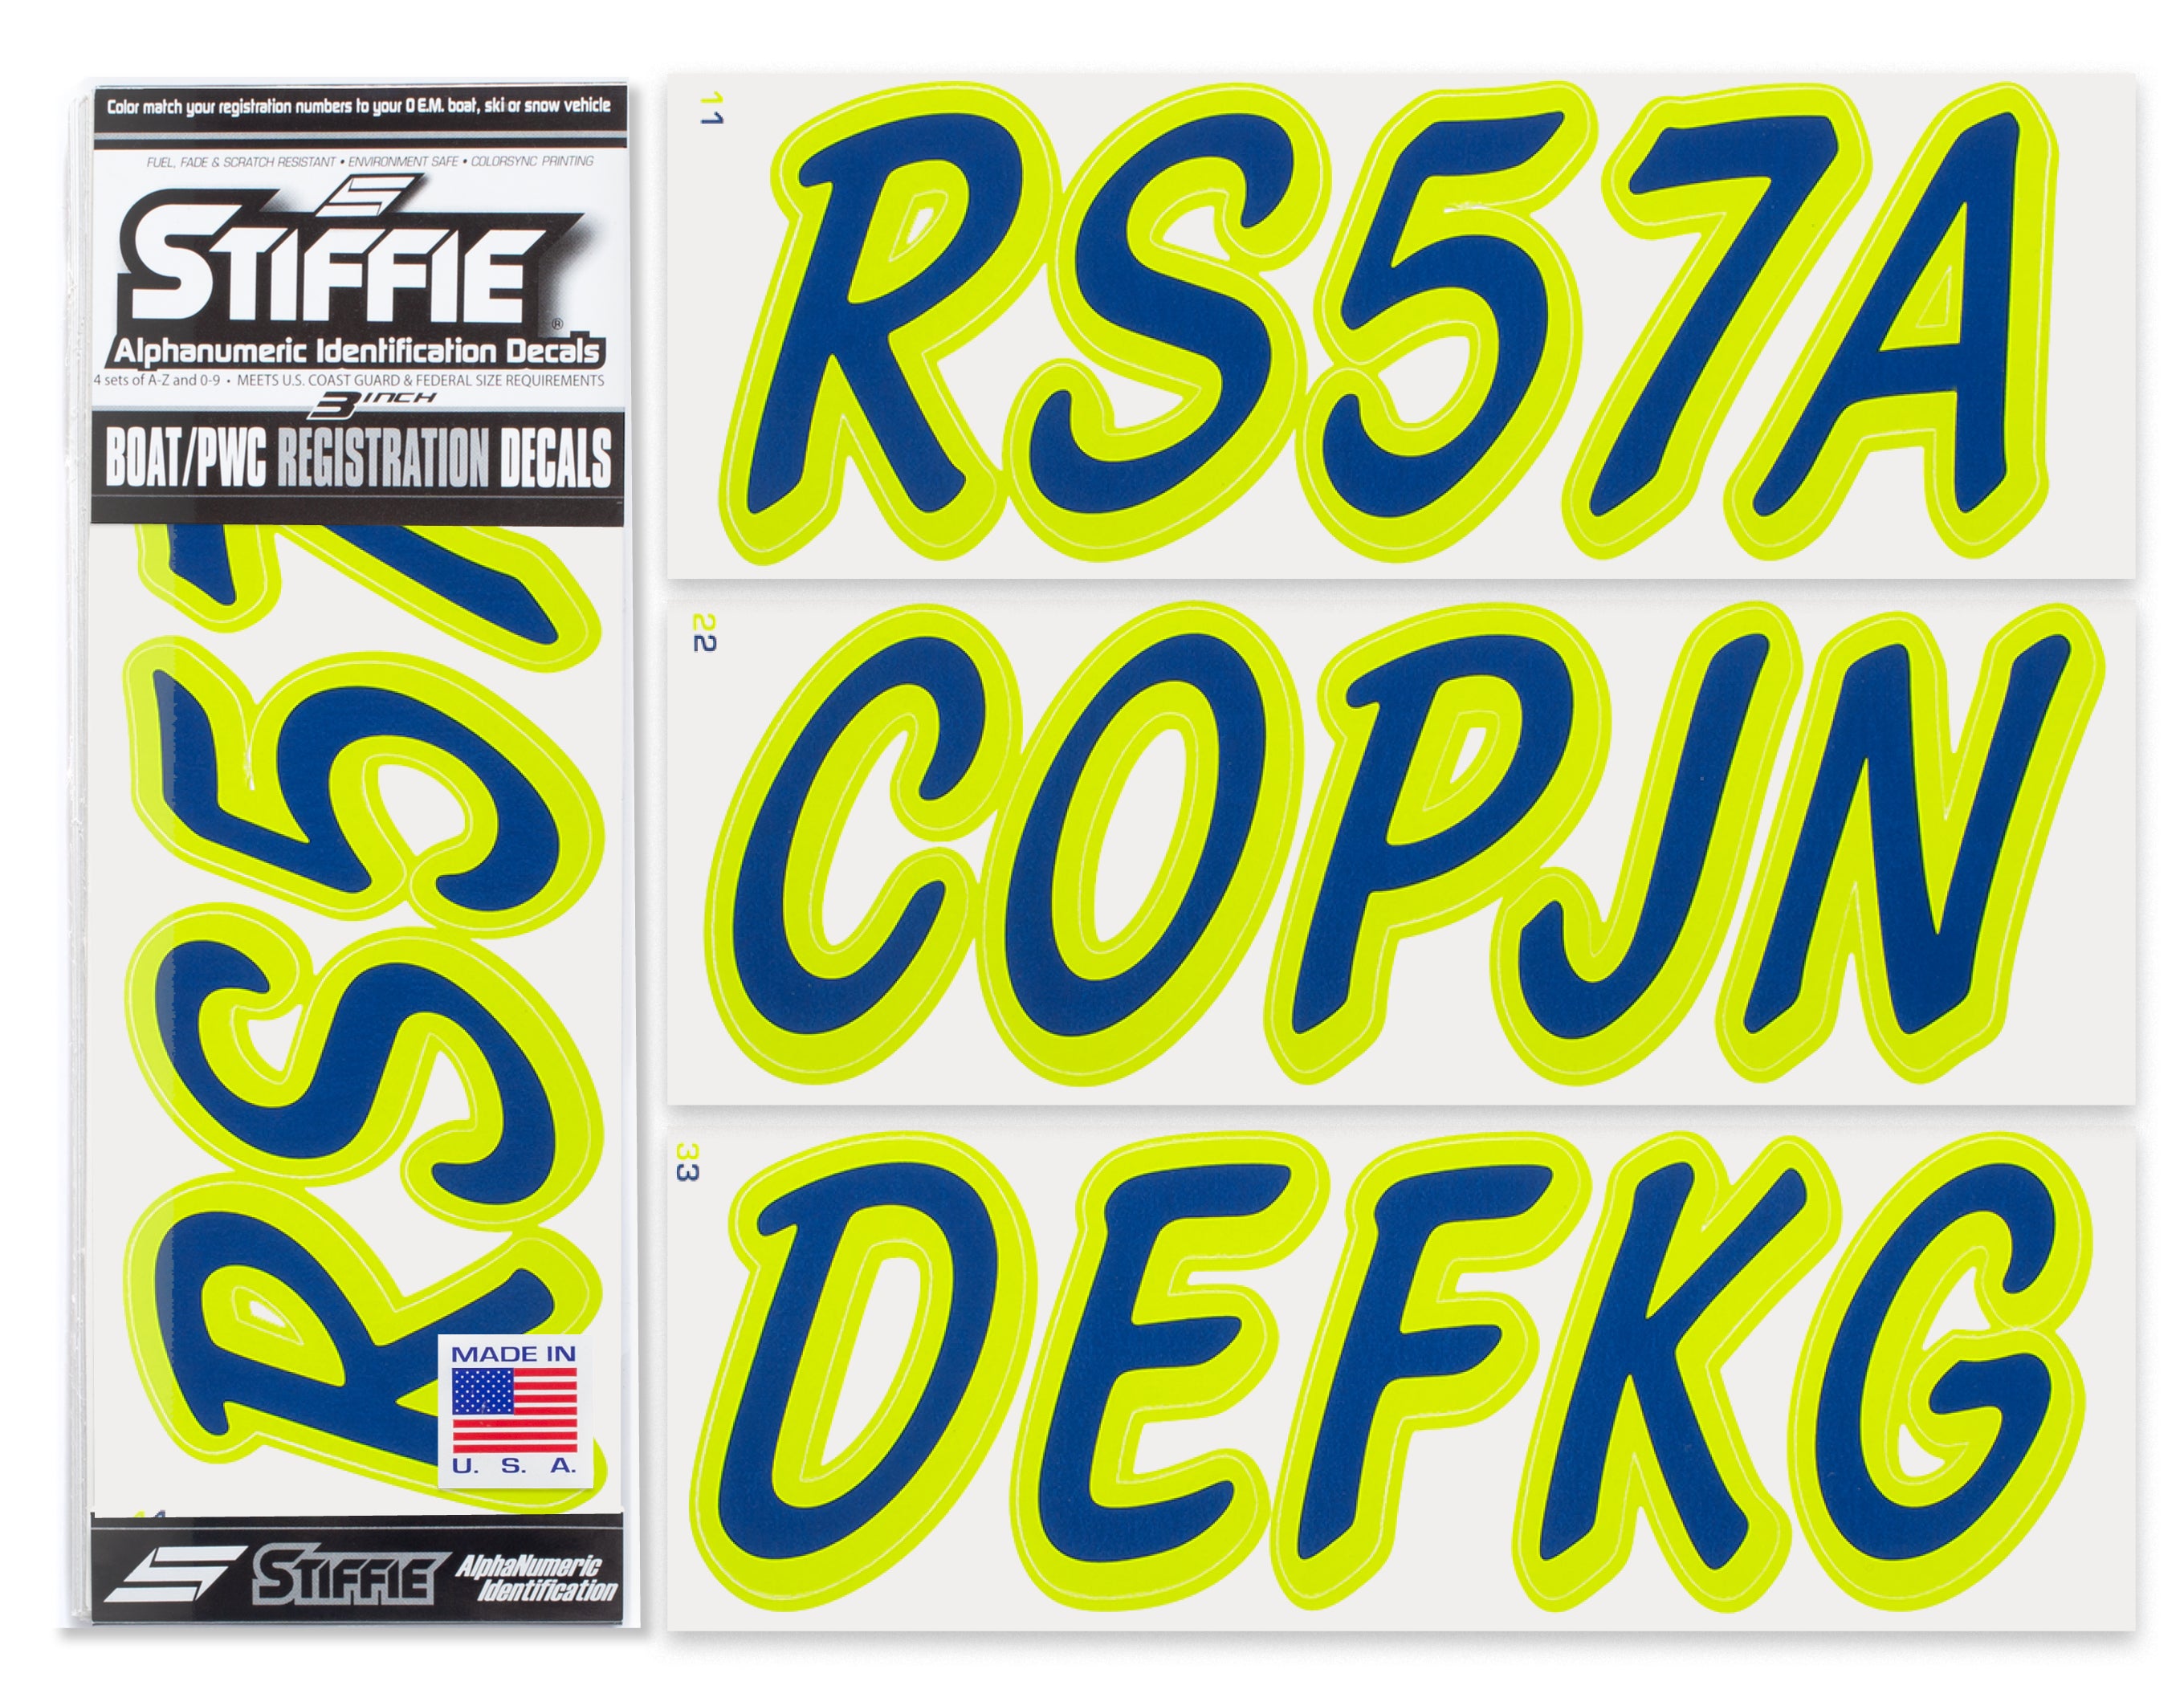 STIFFIE Whipline Solid Navy/Atomic Green 3" Alpha-Numeric Registration Identification Numbers Stickers Decals for Boats & Personal Watercraft